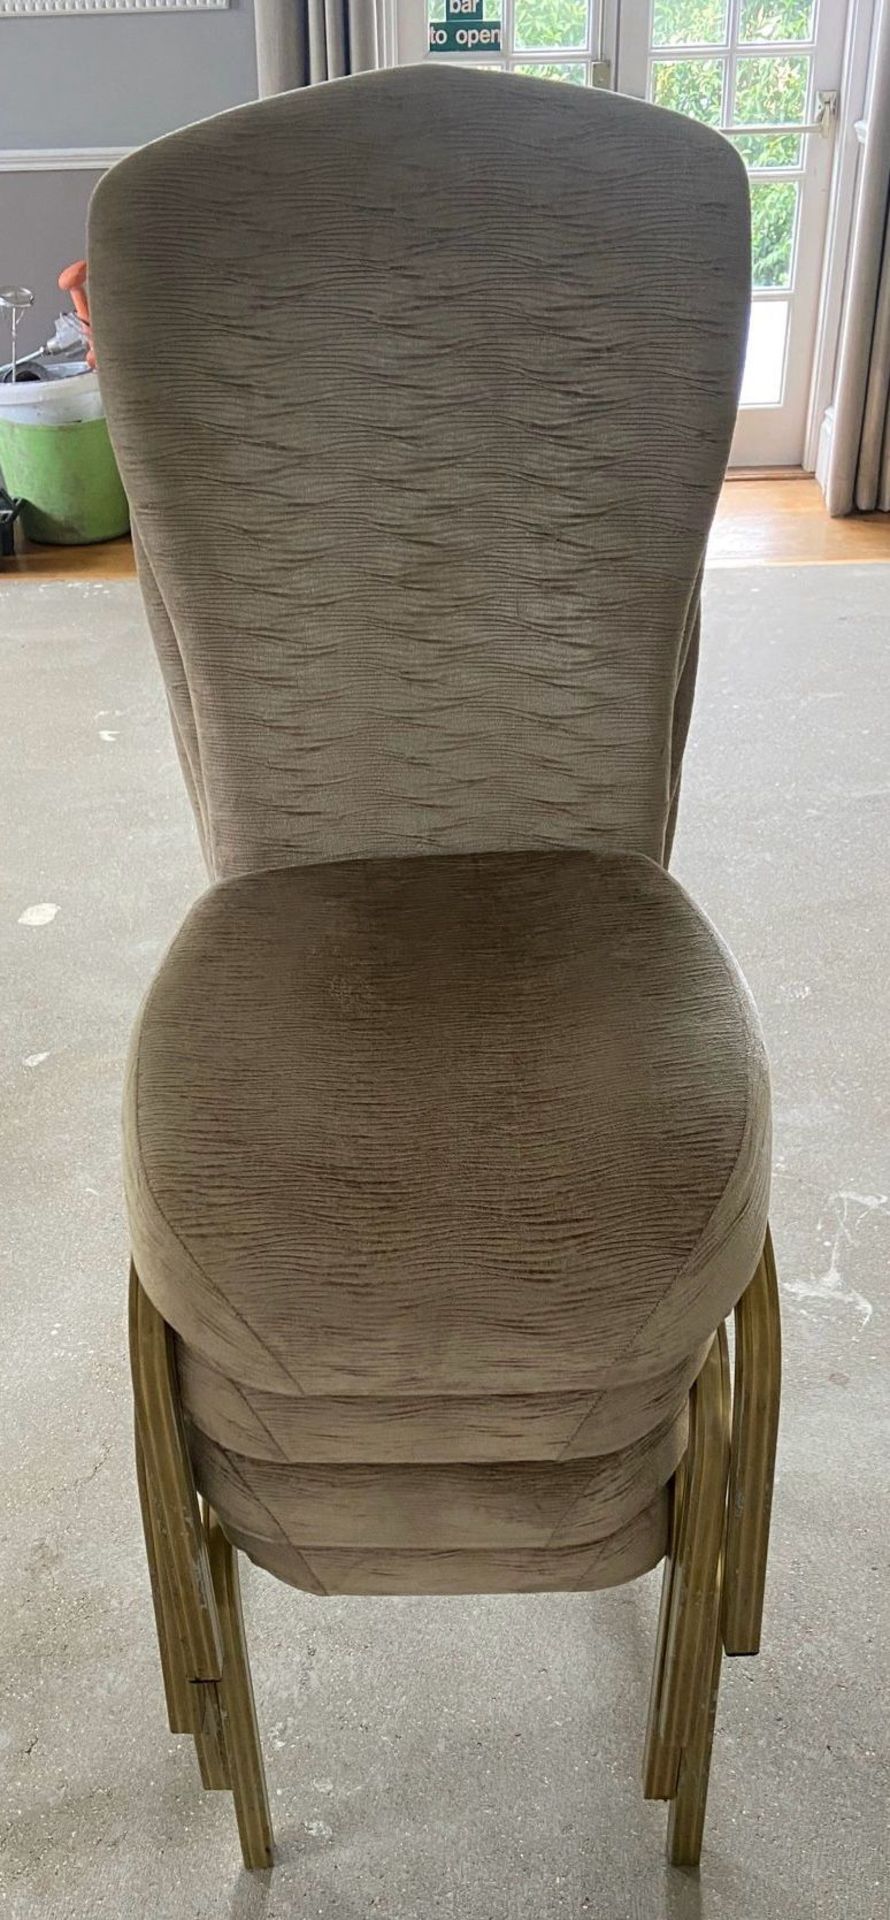 12x stacking banqueting chairs with flex-back, lumbar support and a contoured seat